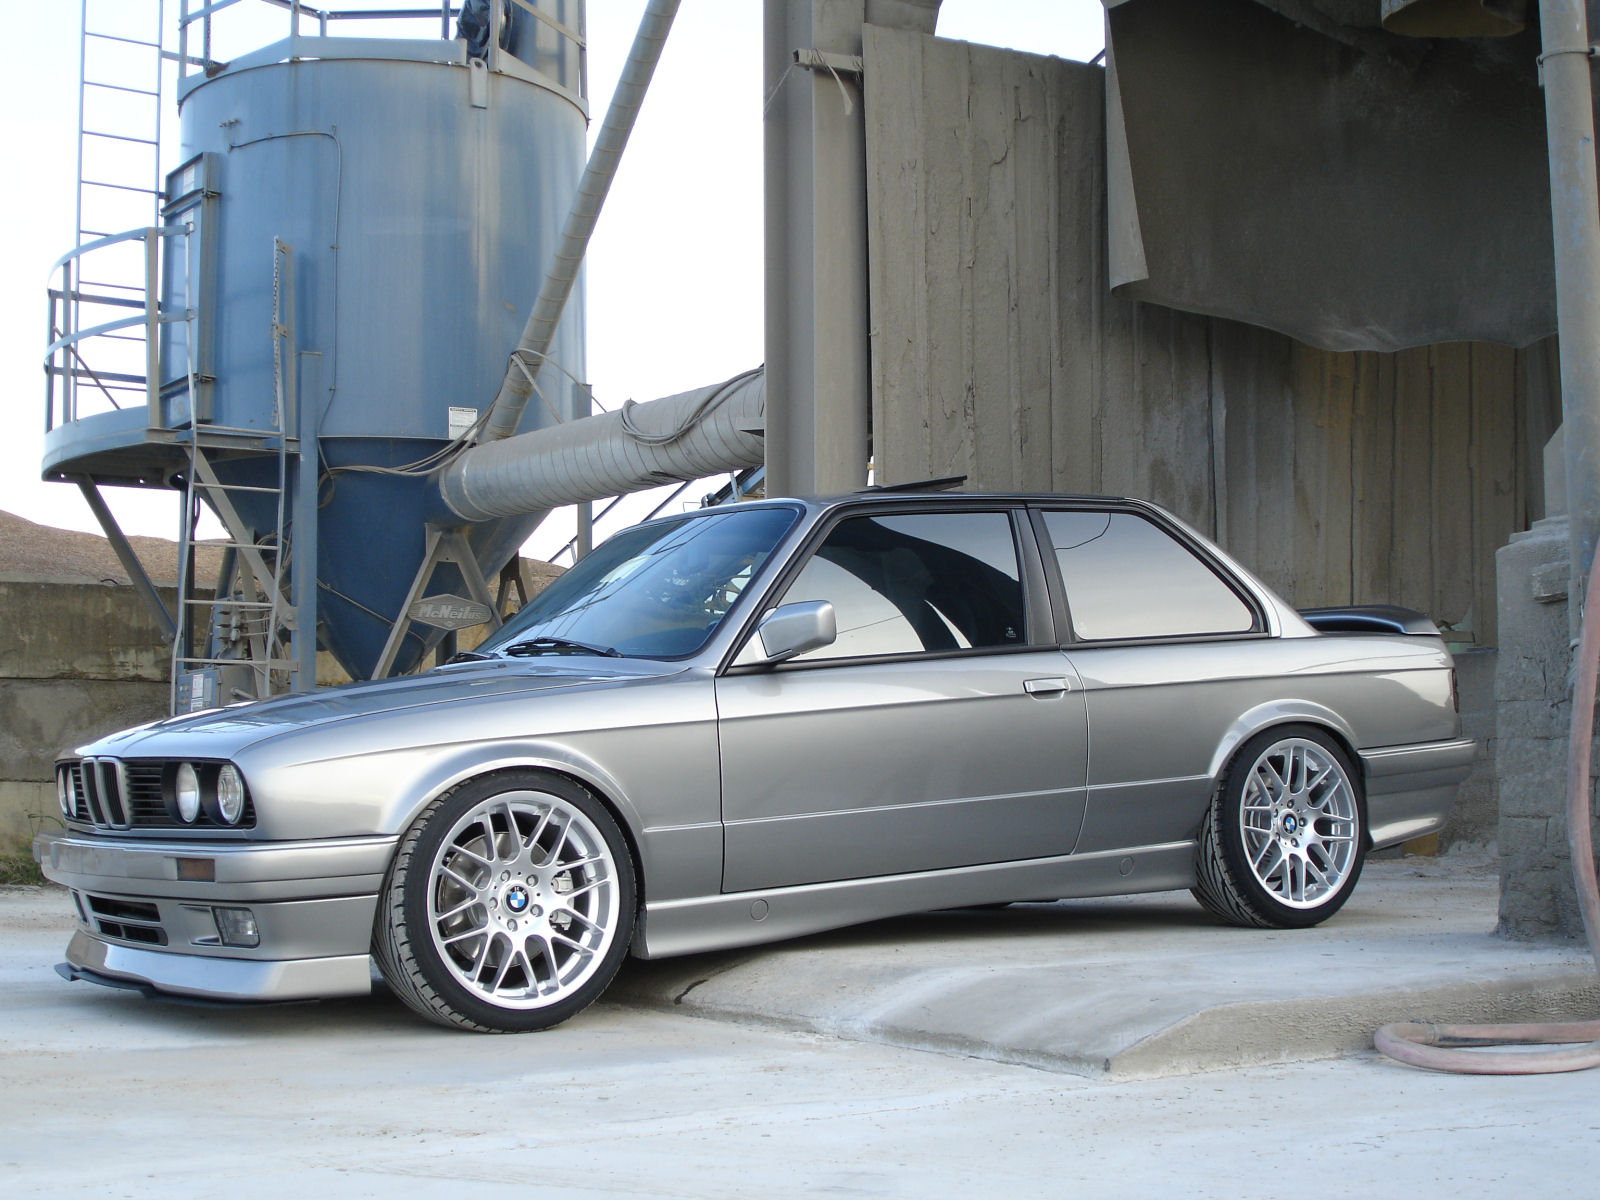 BMW 323i 1990 Review, Amazing Pictures and Images Look